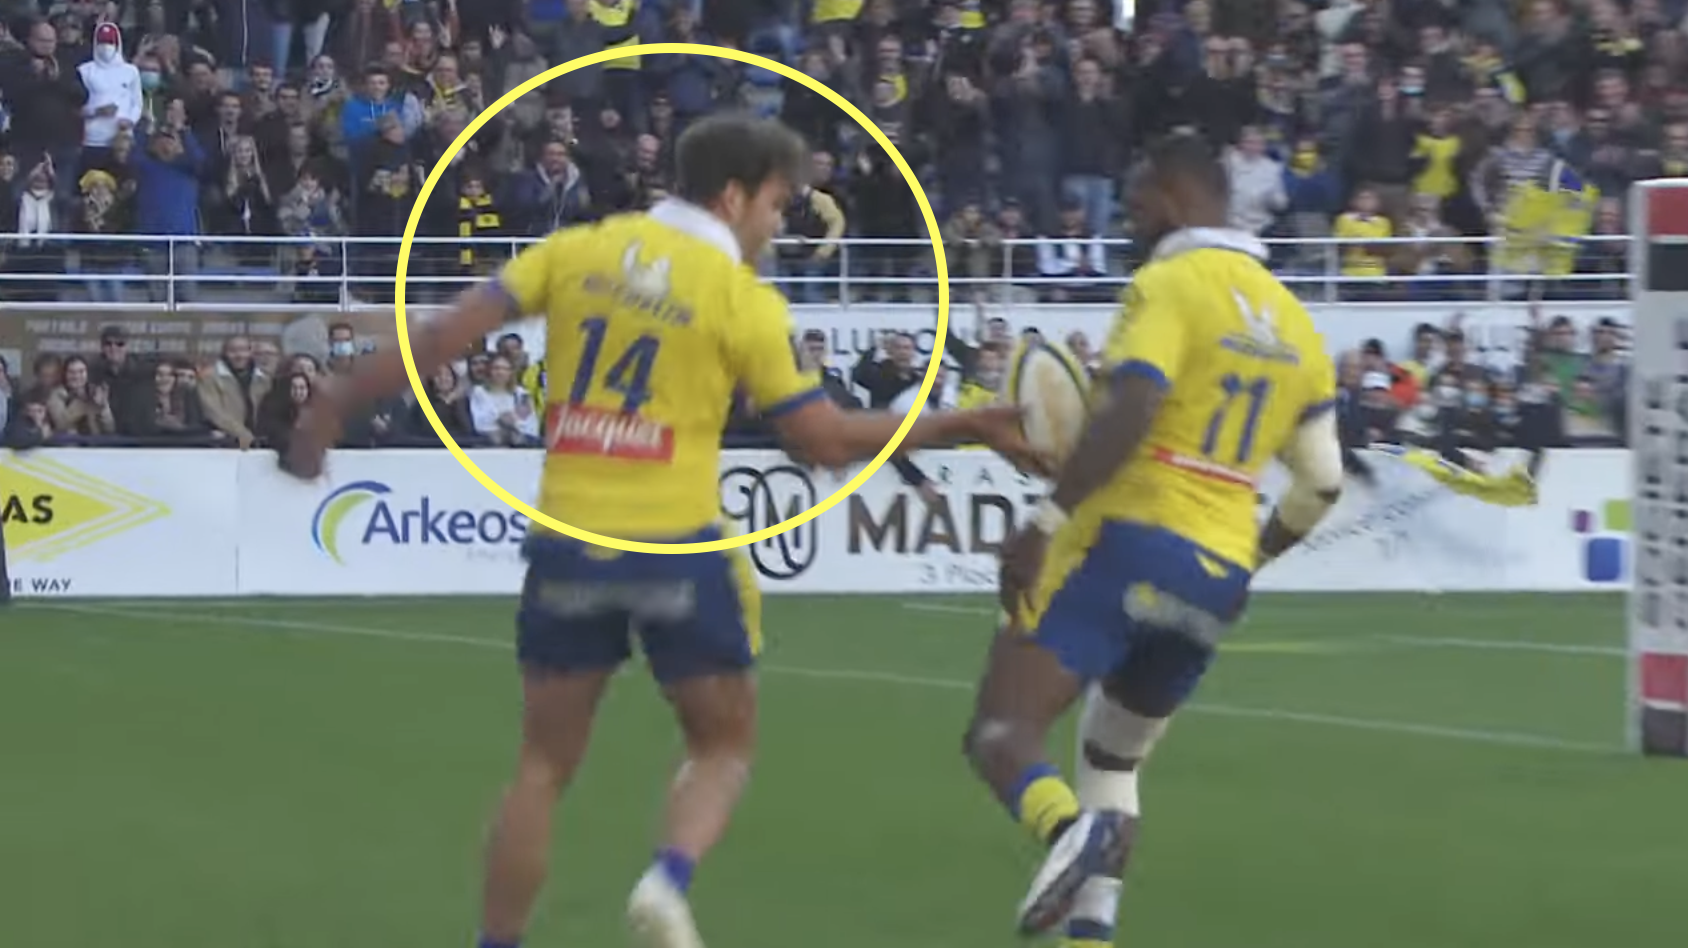 Clermont come close to try scoring blunder they would never have lived down